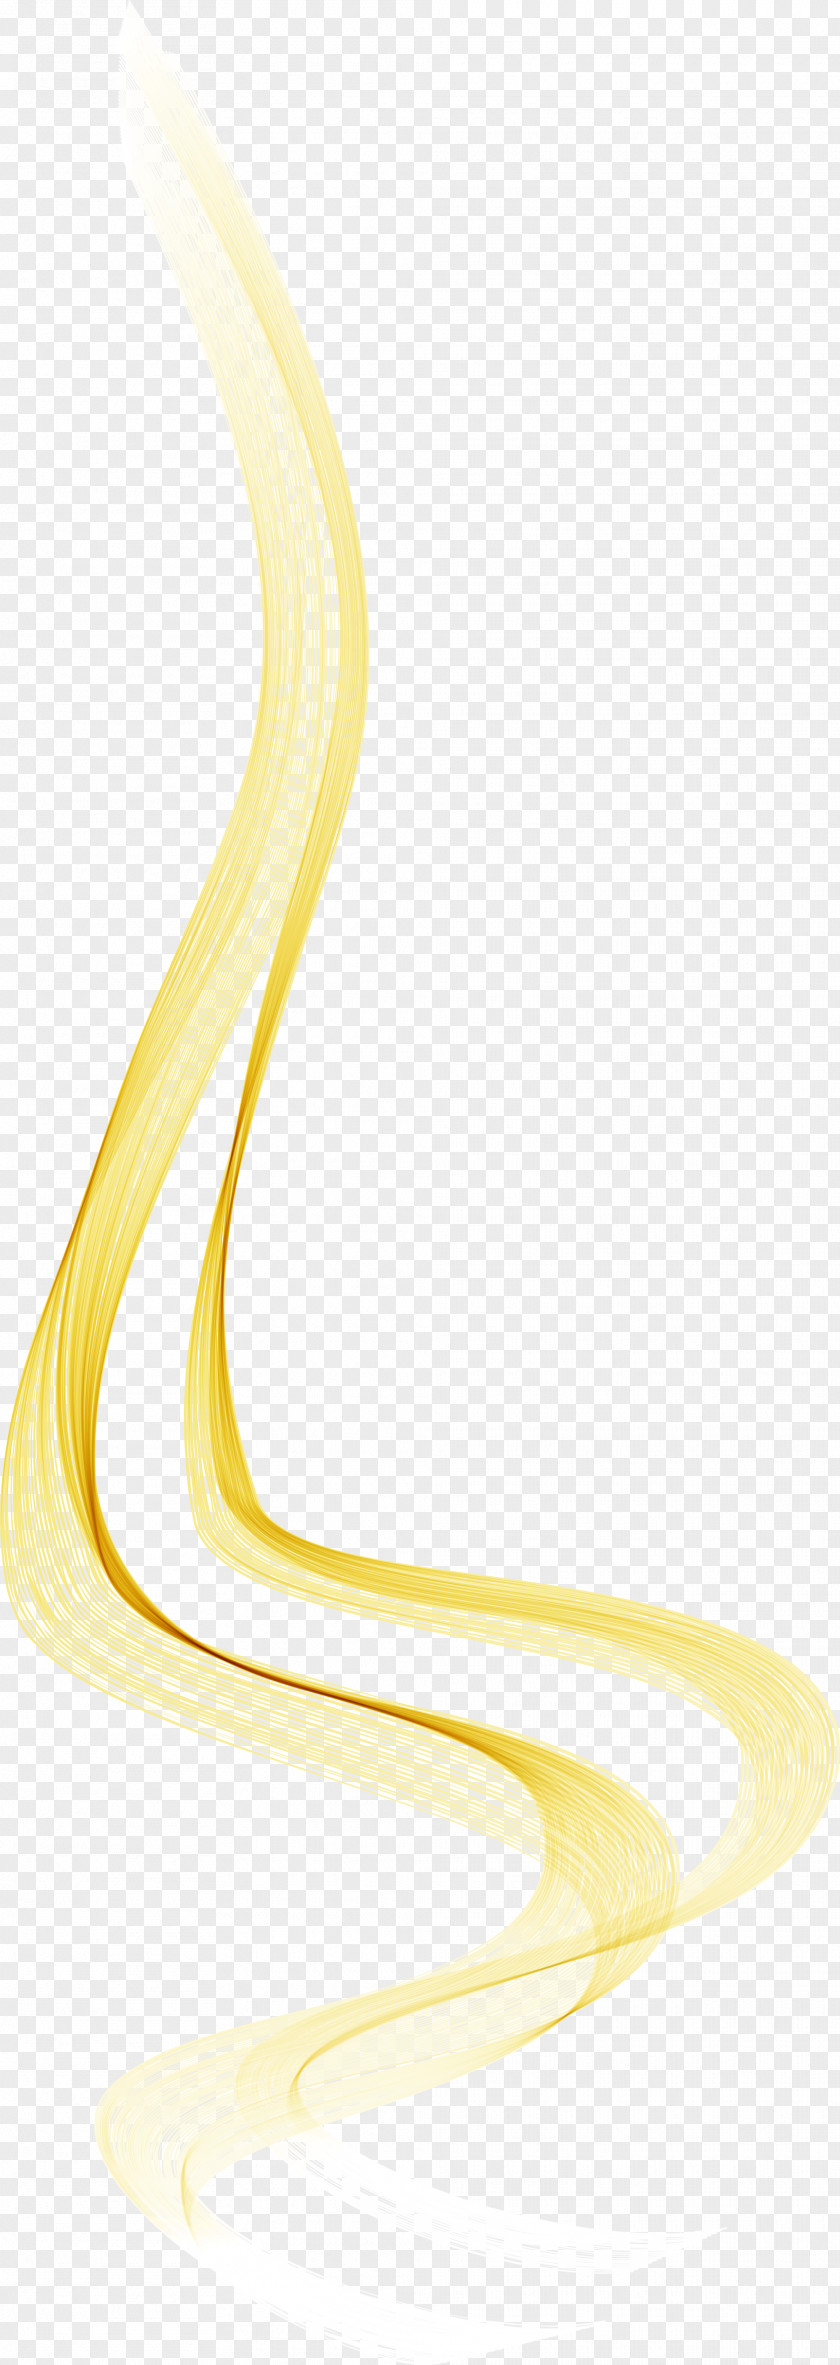 Golden Flare Curve PNG flare curve, yellow line graphic illustration clipart PNG